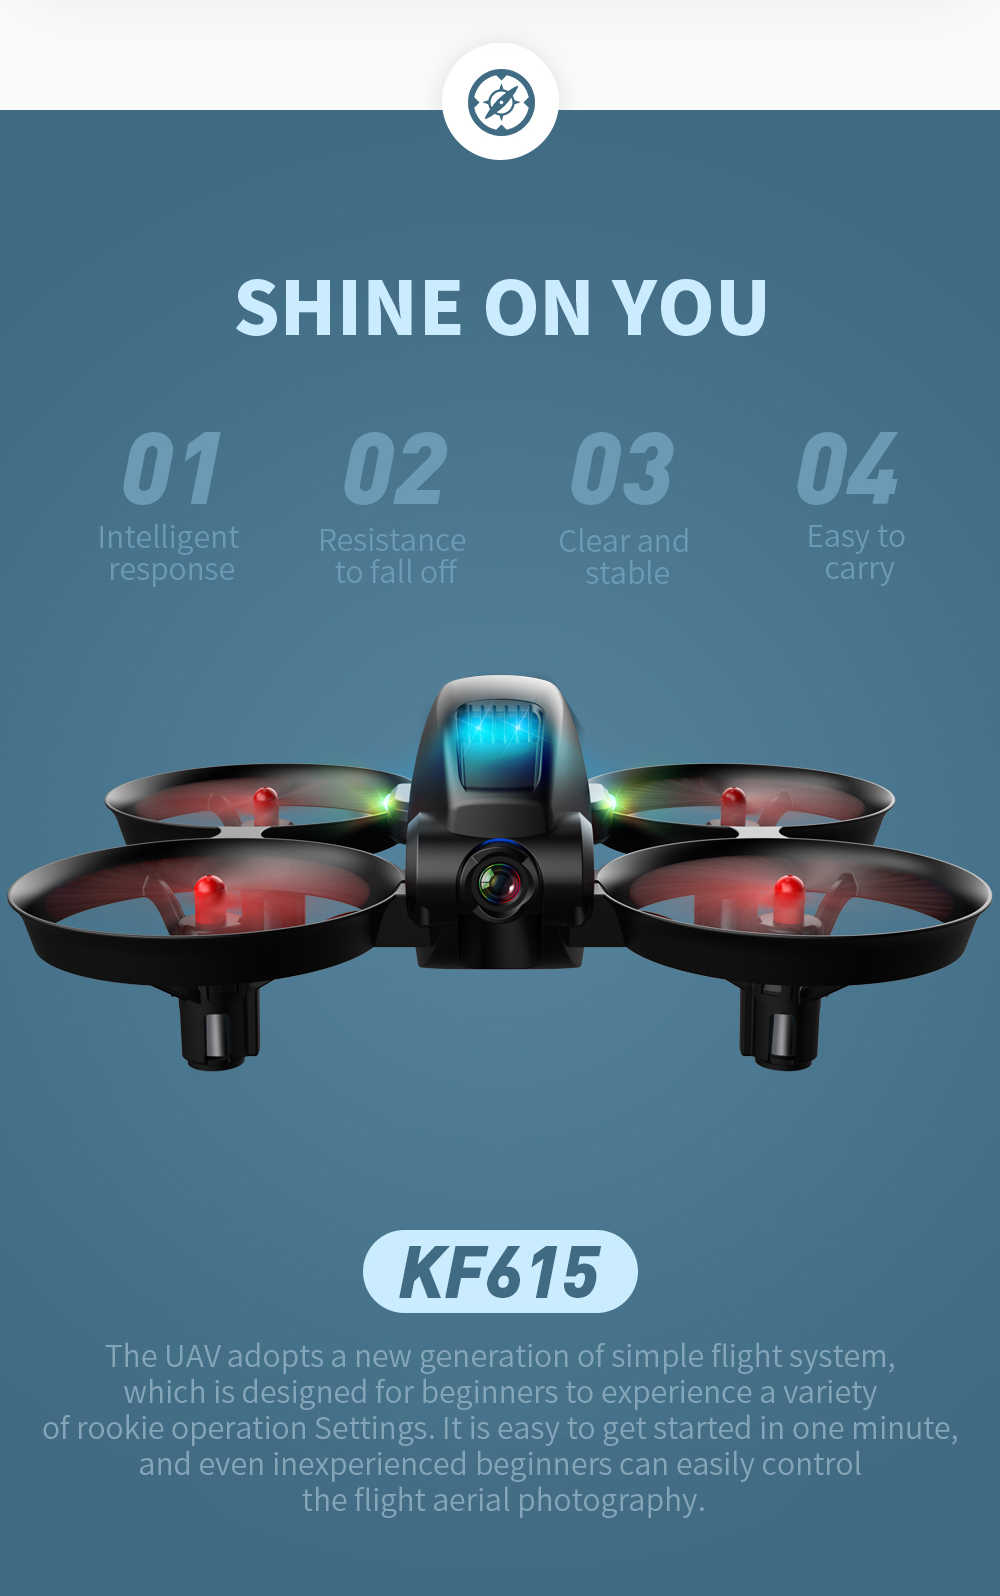 KF615-WIFI-FPV-with-4K-Dual-Camera-Optical-Flow-Positioning-Headless-Mode-Gyro-self-stabilization-RC-1882626-6